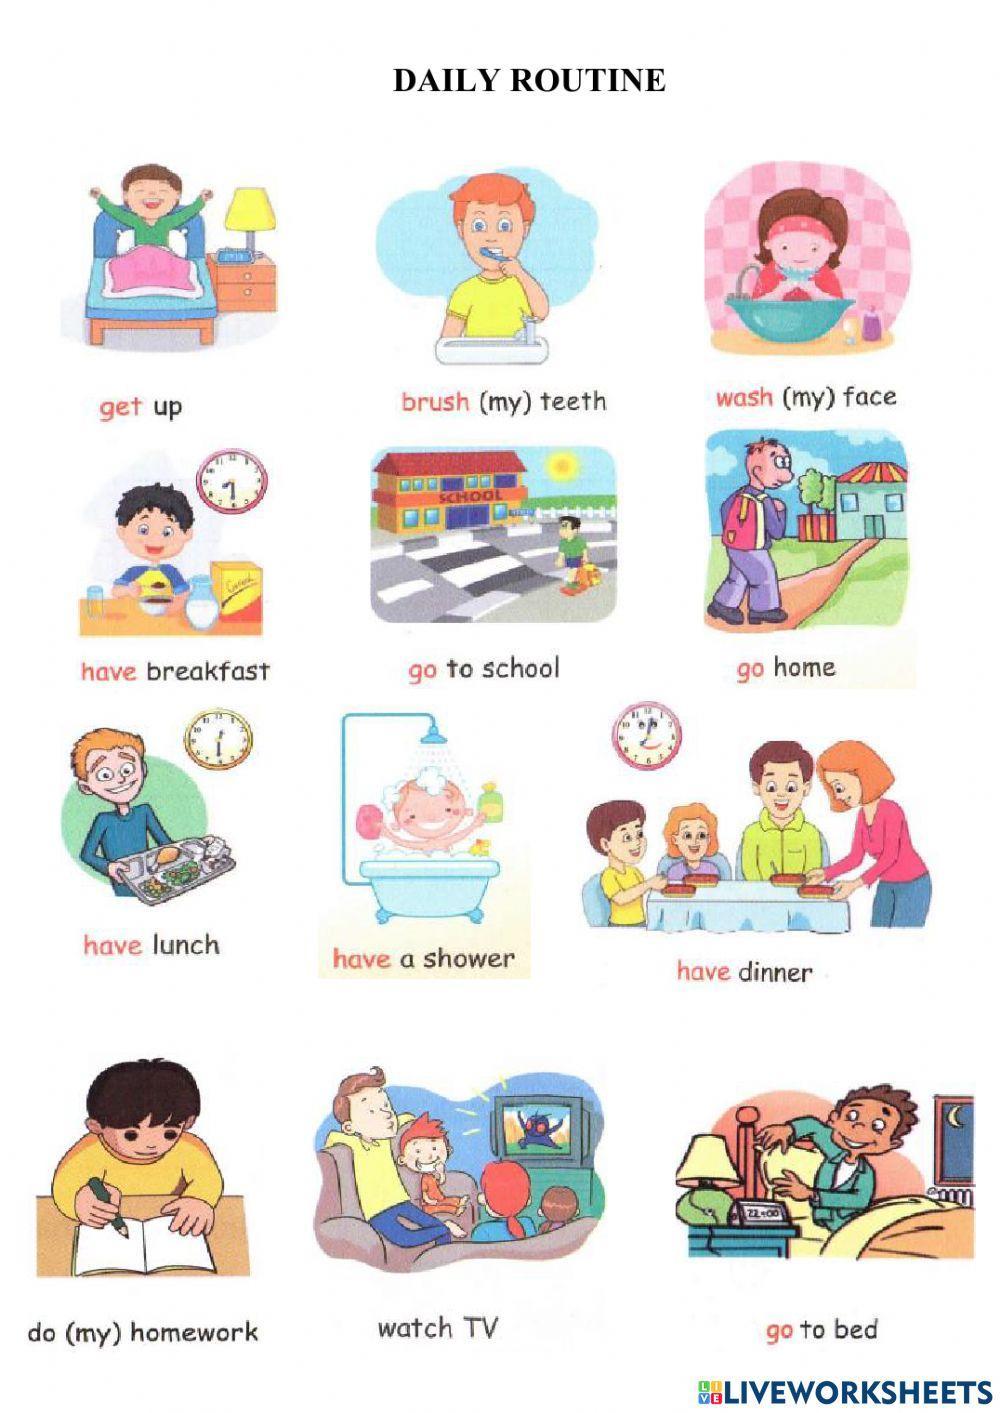 Daily routine for kids